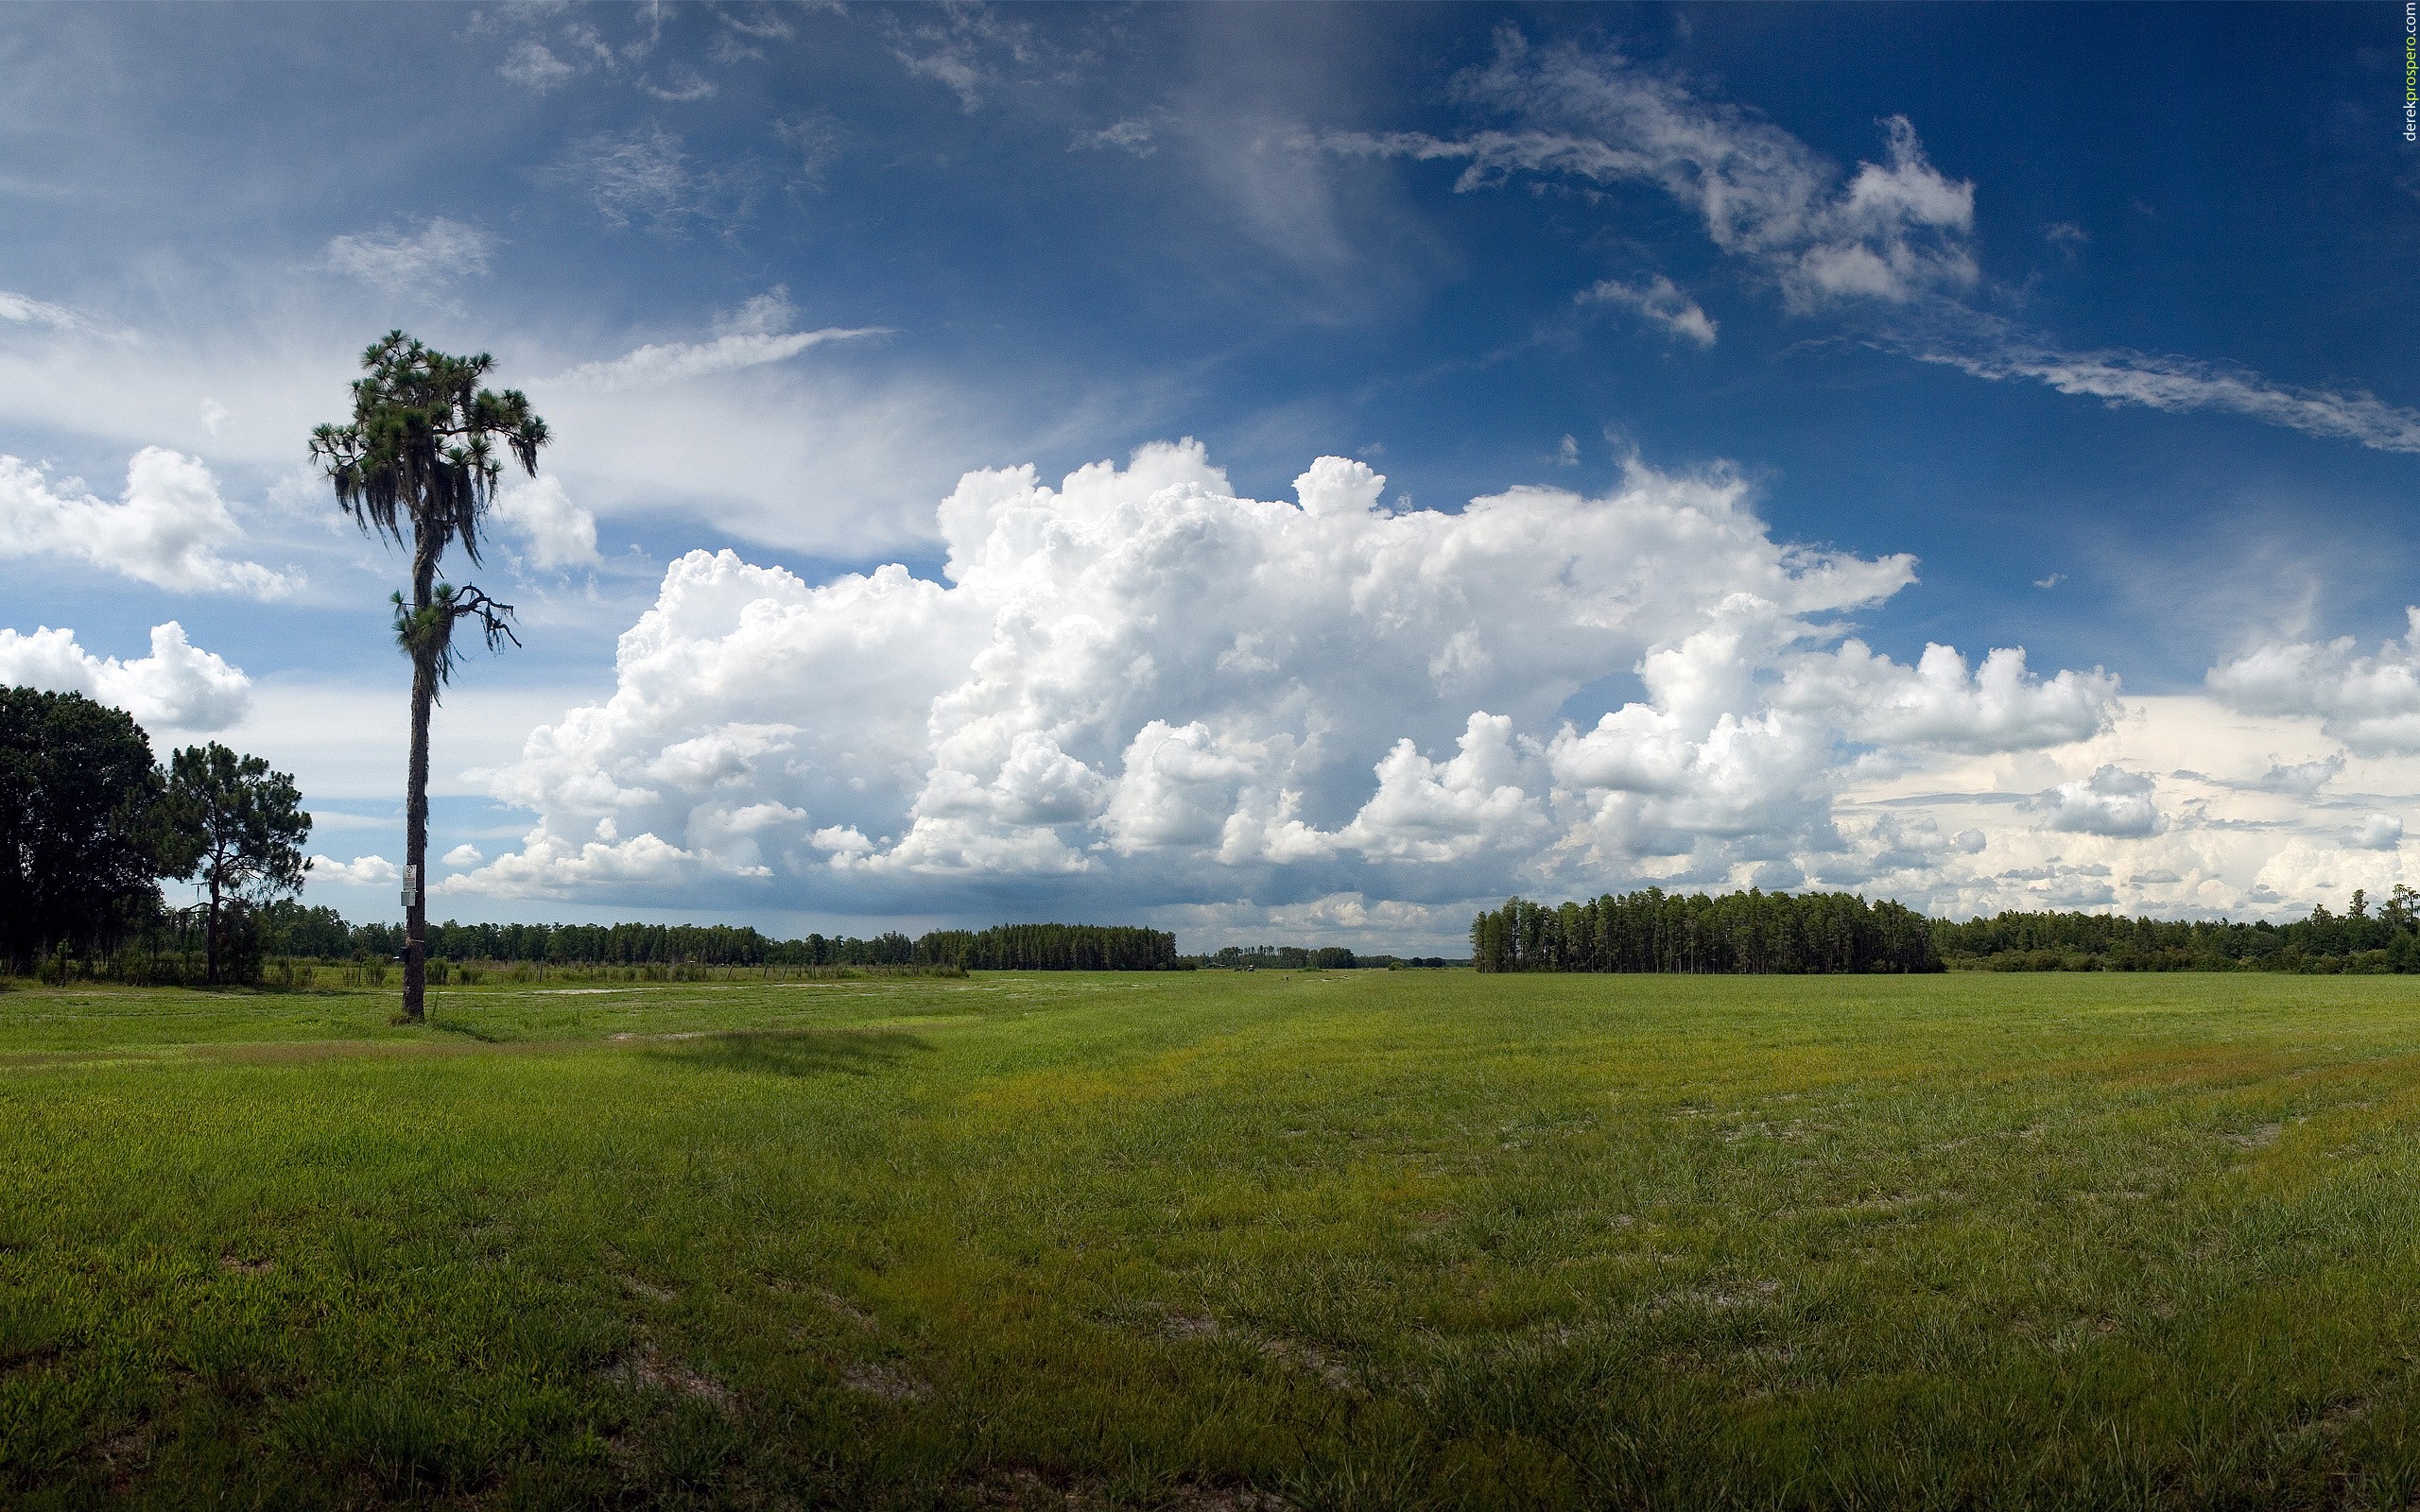 General 2560x1600 landscape field trees clouds nature sky